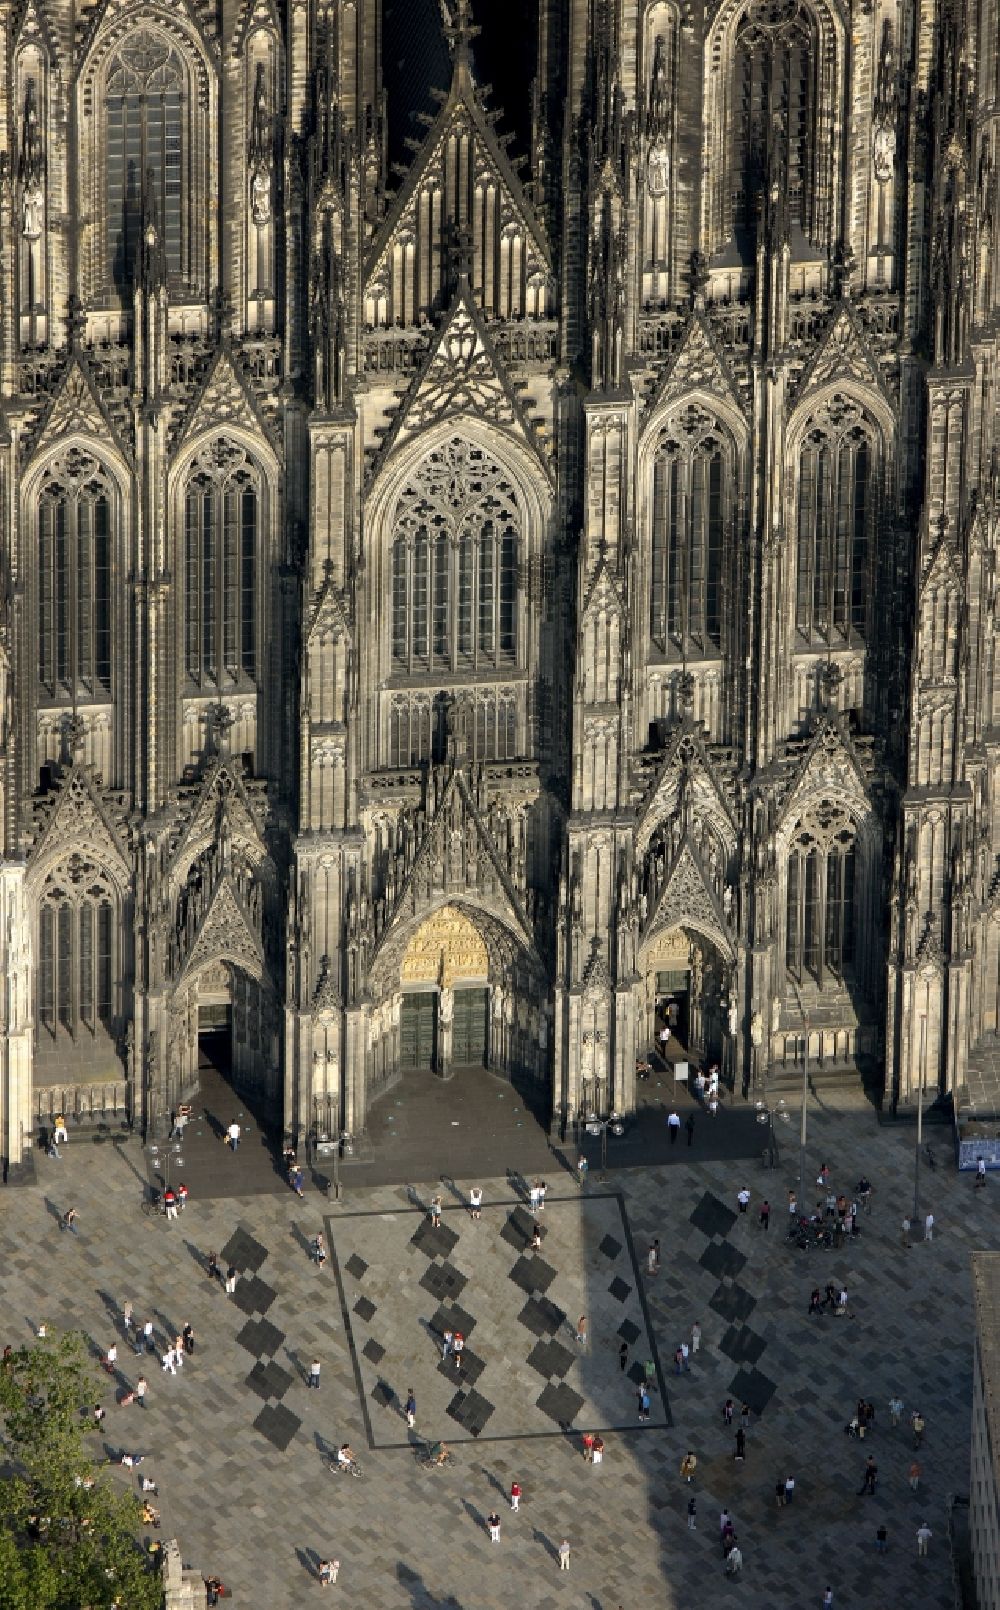 Köln from above - View of the Cologne Cathedral in the center of Cologne, near central station. The Cologne Cathedral is a Roman Catholic church in the Gothic style in Cologne and the Cathedral of the Archdiocese of Cologne. It is the second highest church building in Europe and the third highest in the world